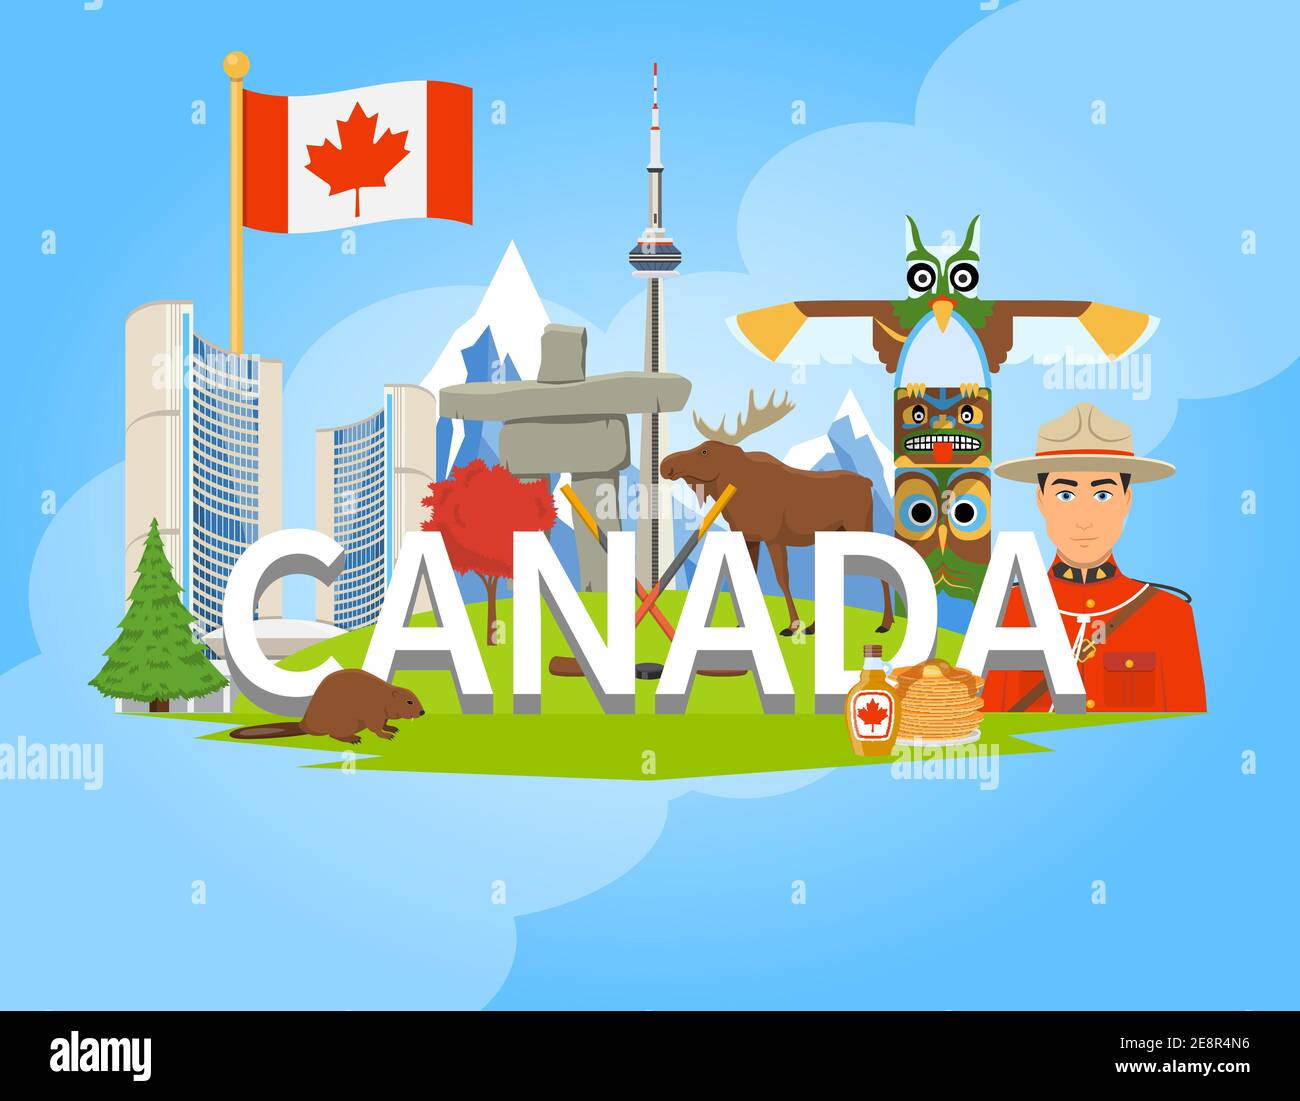 Canadian national cultural symbols landmarks and places of interest for tourists flat composition background poster vector illustration Stock Vector